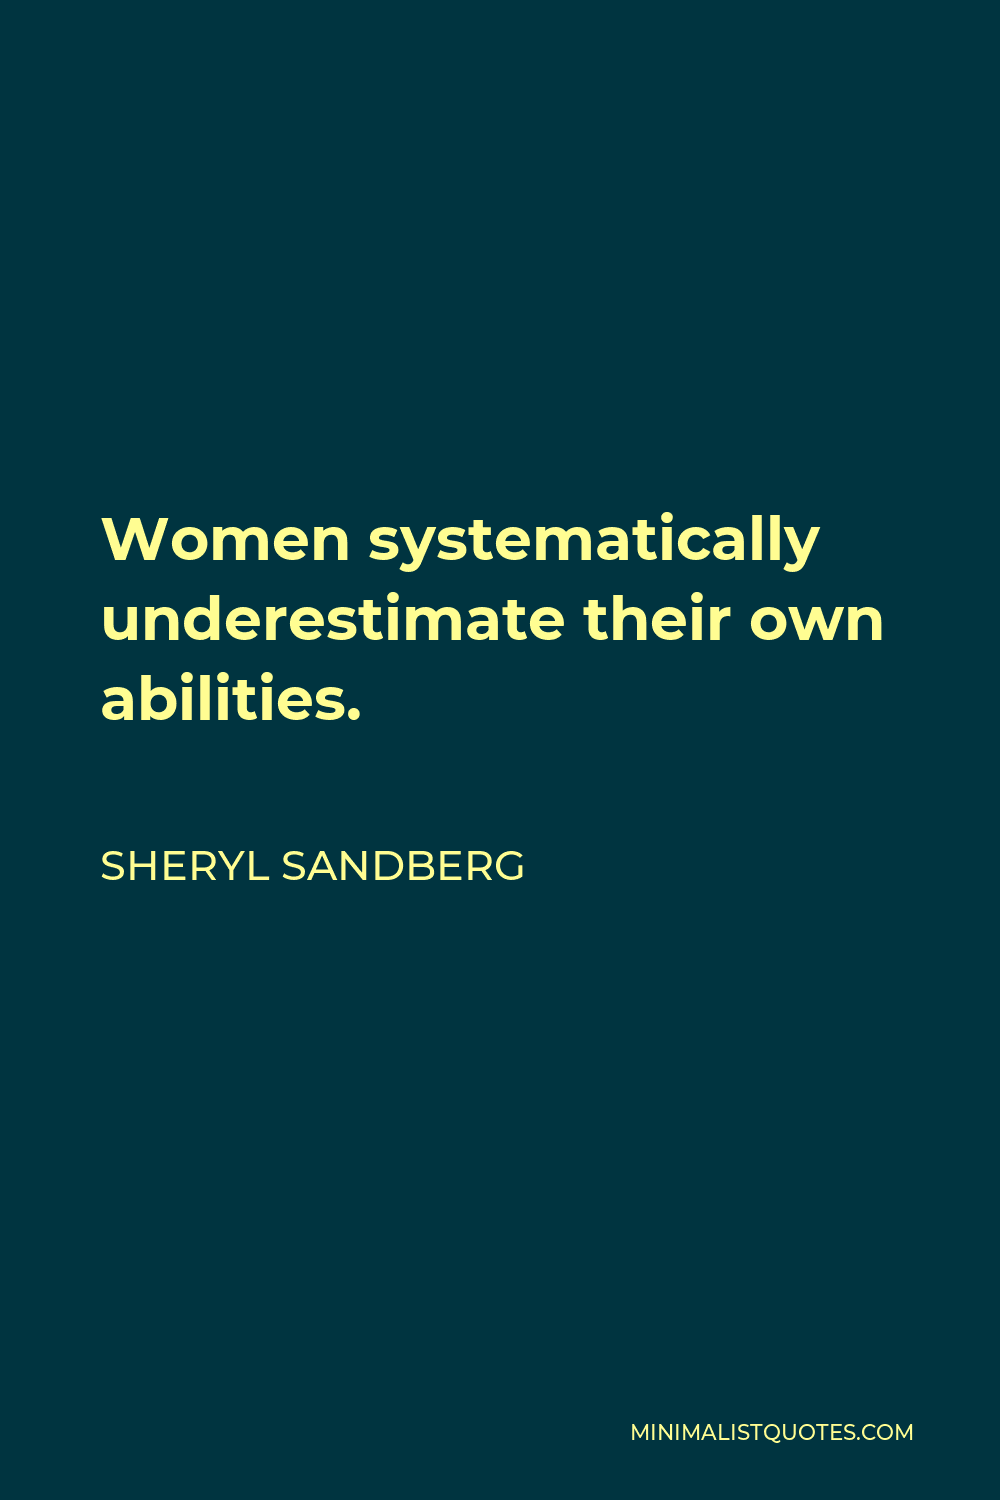 Sheryl Sandberg Quote - Women systematically underestimate their own abilities.